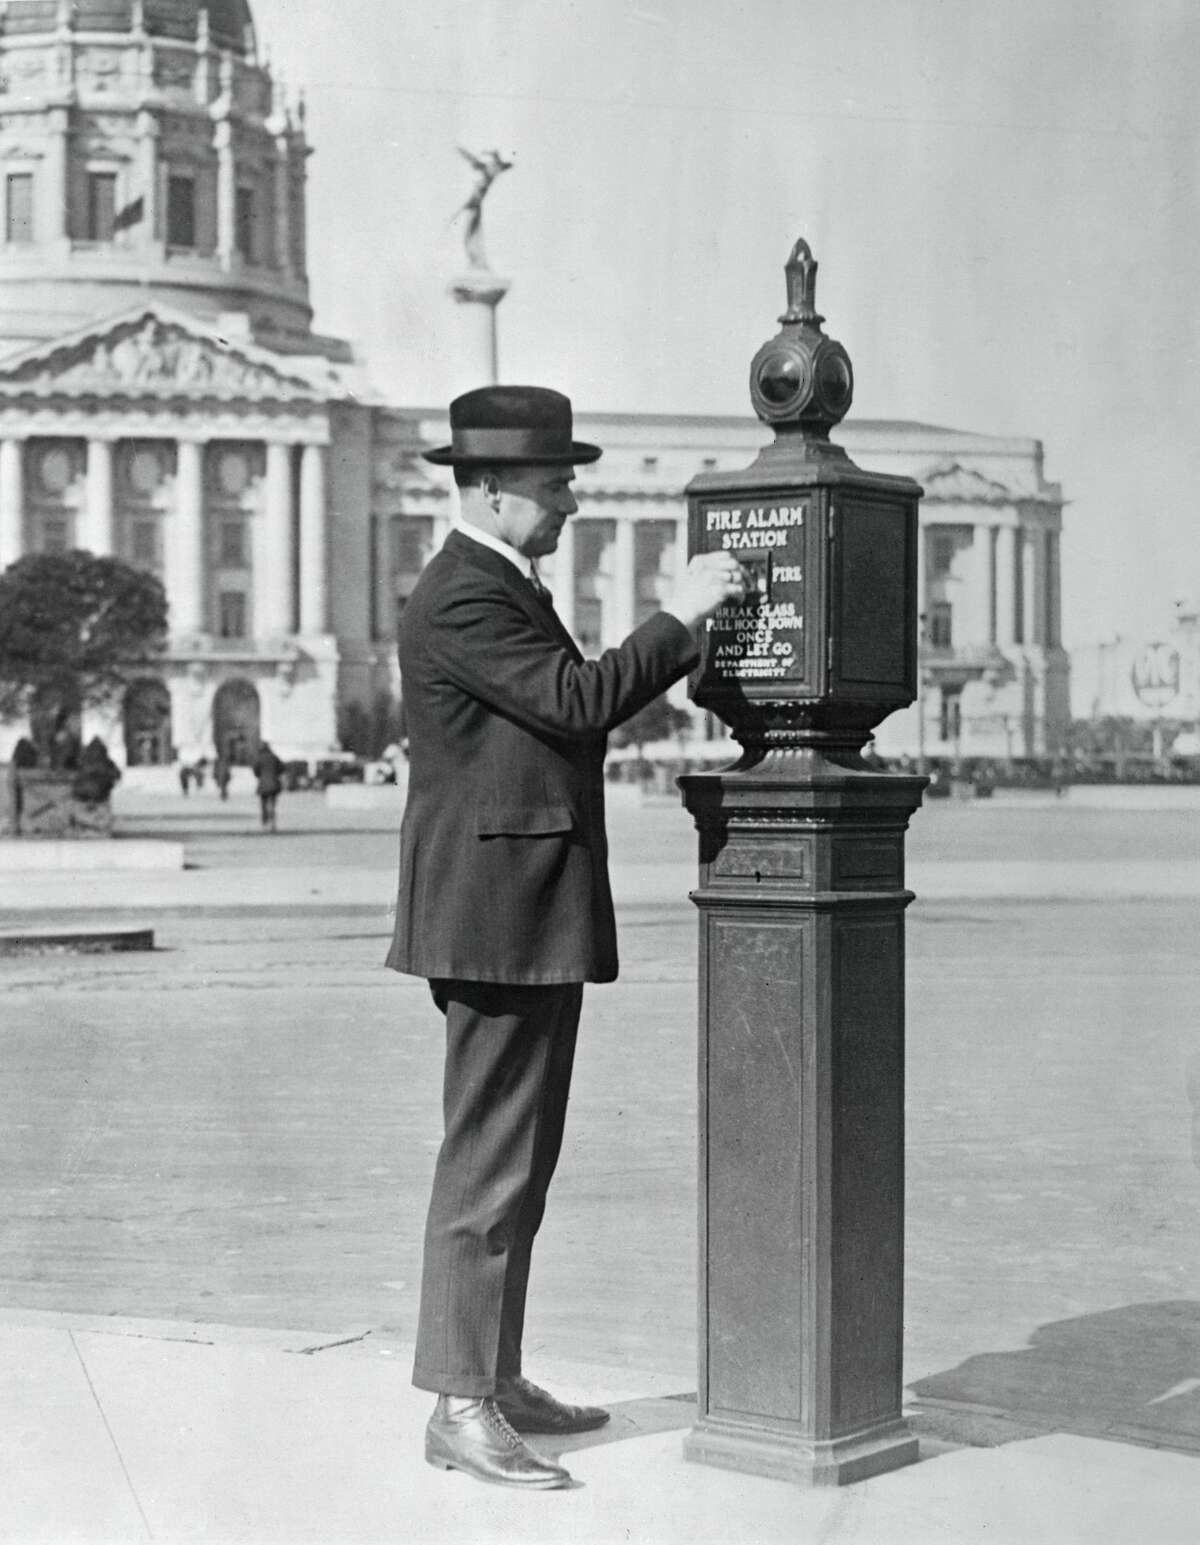 A man tests out a new invention from the San Francisco Fire Department: a call box.